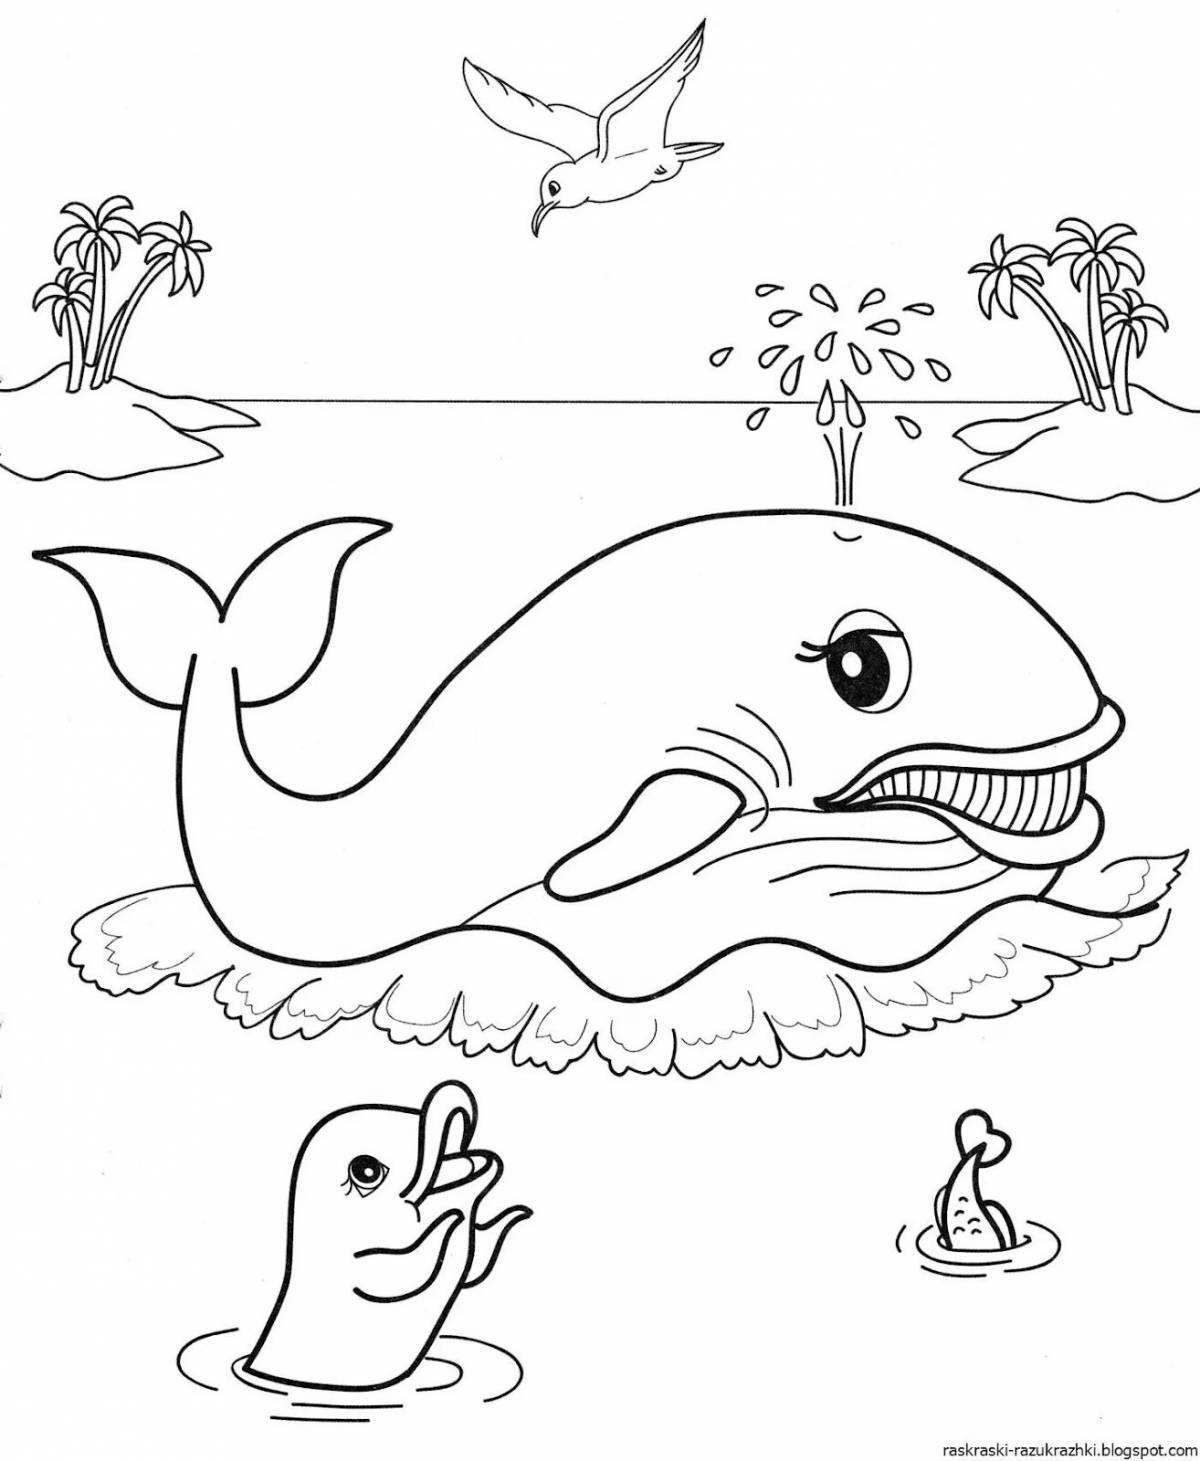 Cute coloring pages inhabitants of the seas and oceans for children